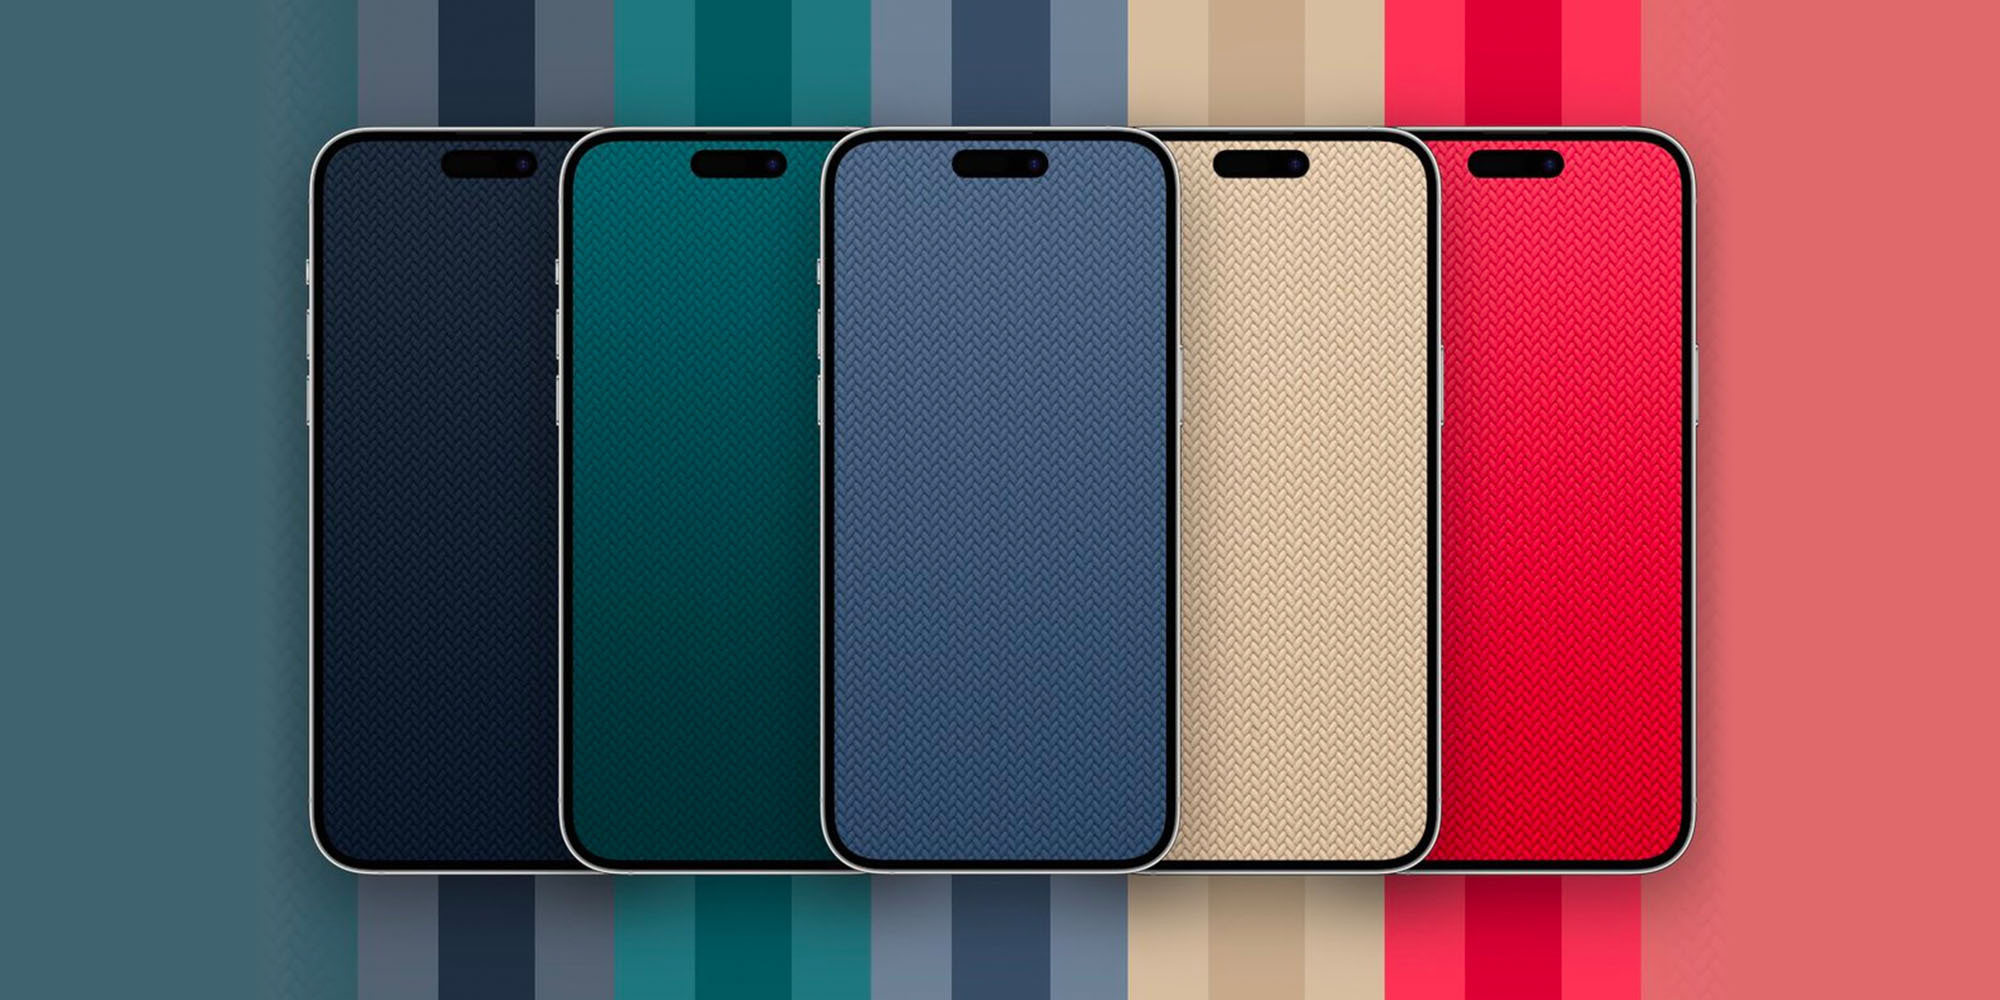 These wallpapers bring a touch of the Apple Watch braided bands to your  iPhone